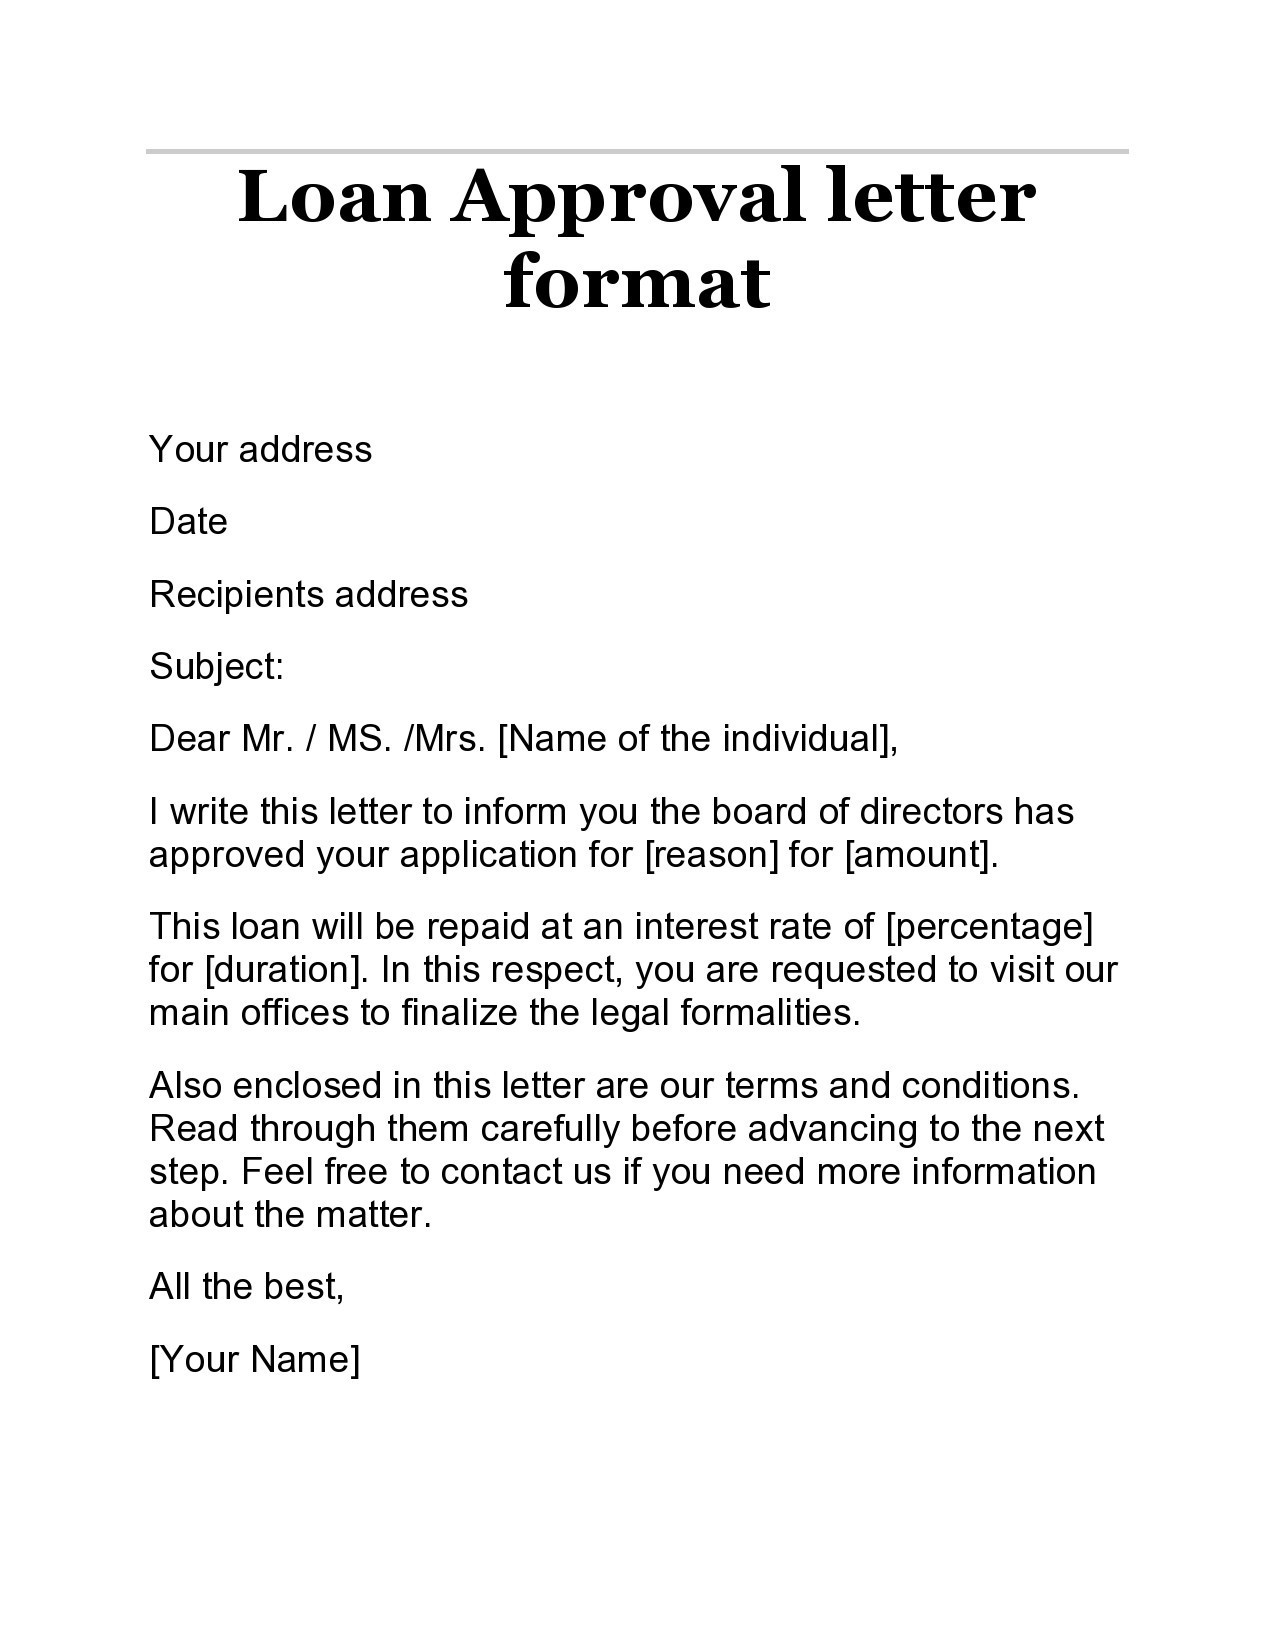 Free pre approval letter 19